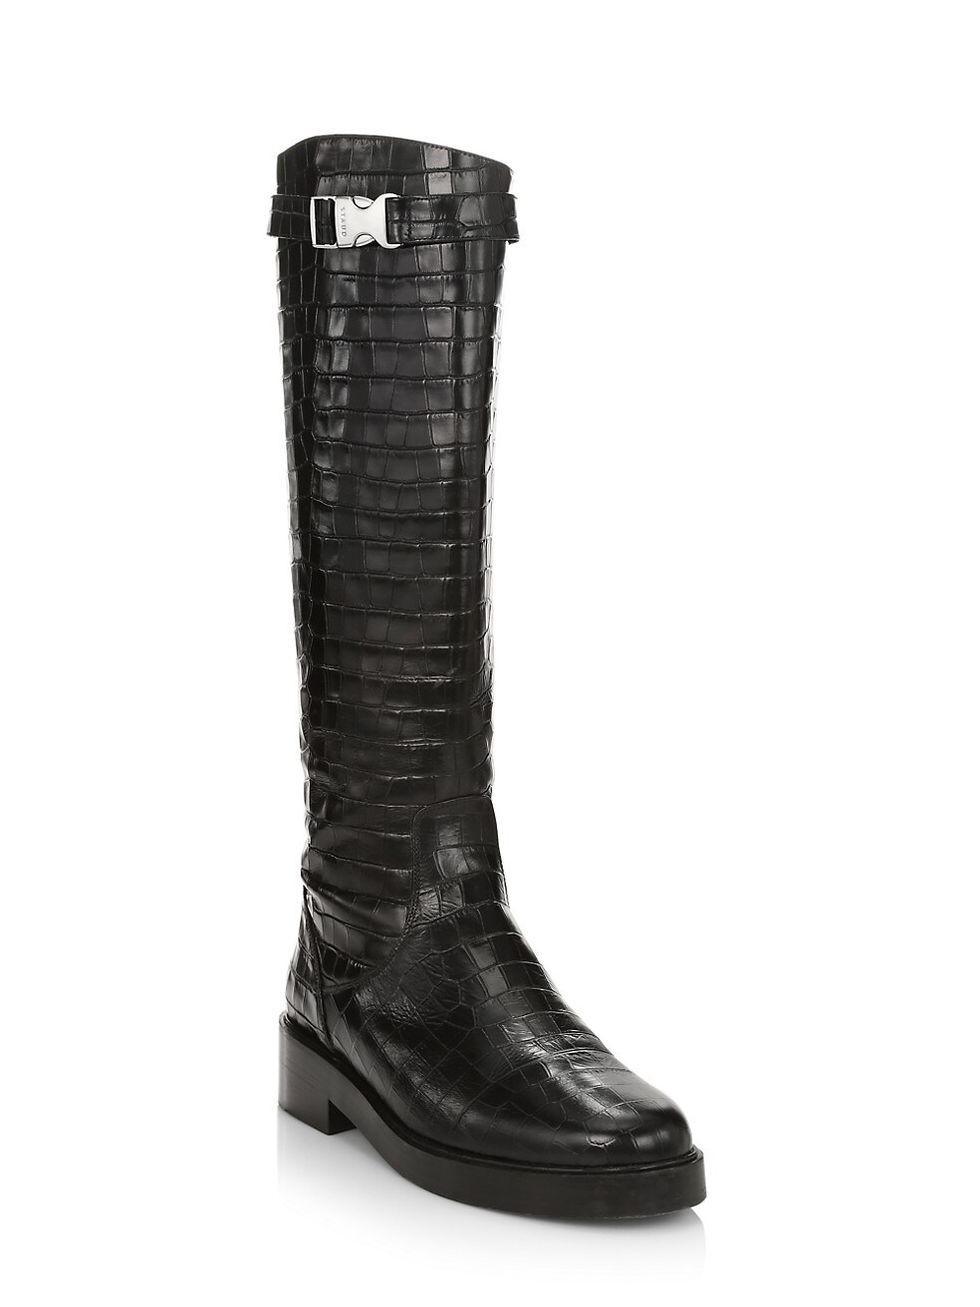 Claud Buckle Riding Boots